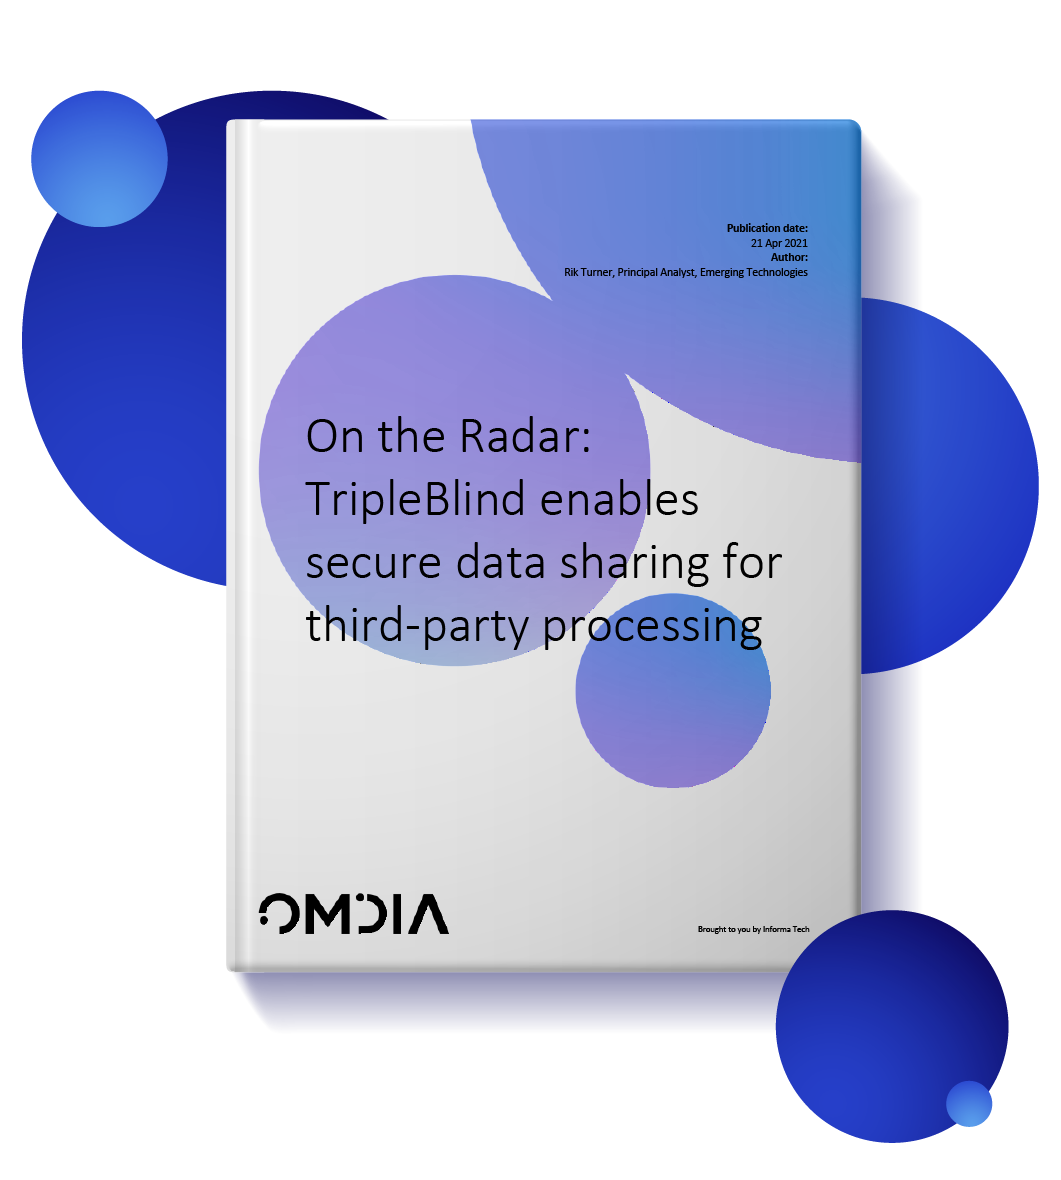 Omdia: On the Radar: TripleBlind enables secure data sharing for third-party processing